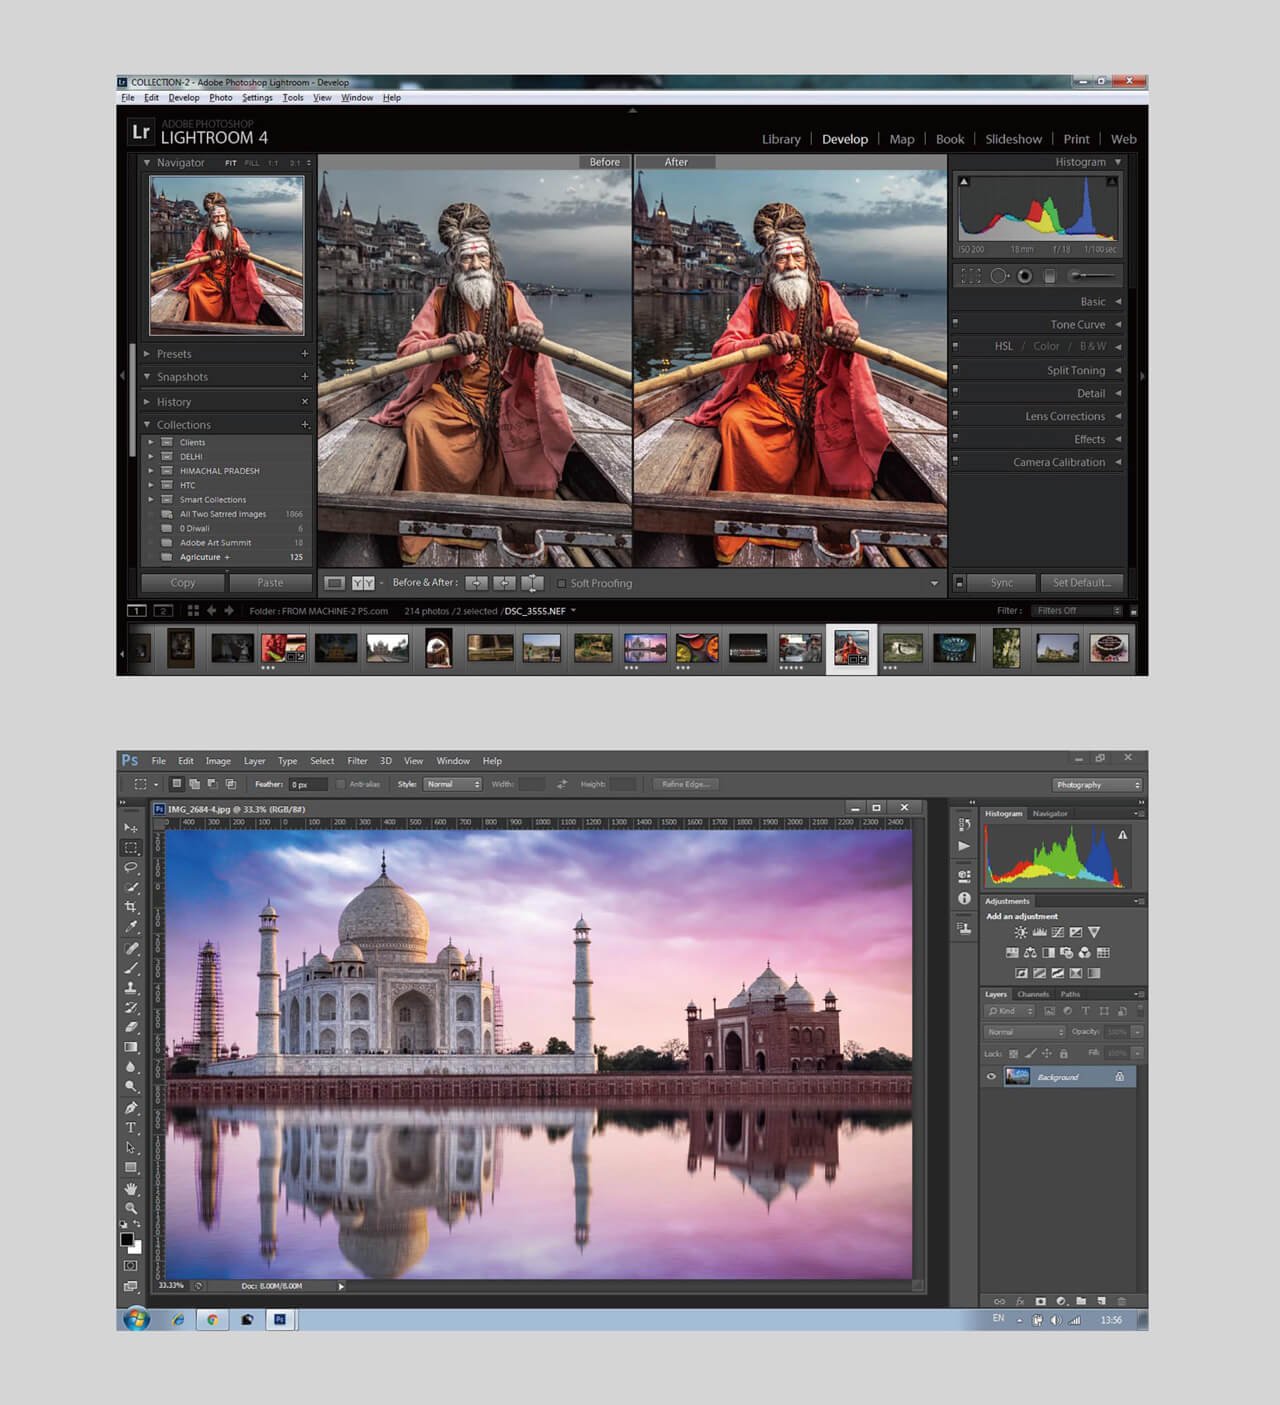 The advantage of having a monitor with a 16:9 aspect ratio is that the display can be comprehensively utilized when running photo editing software such as LR or PS.